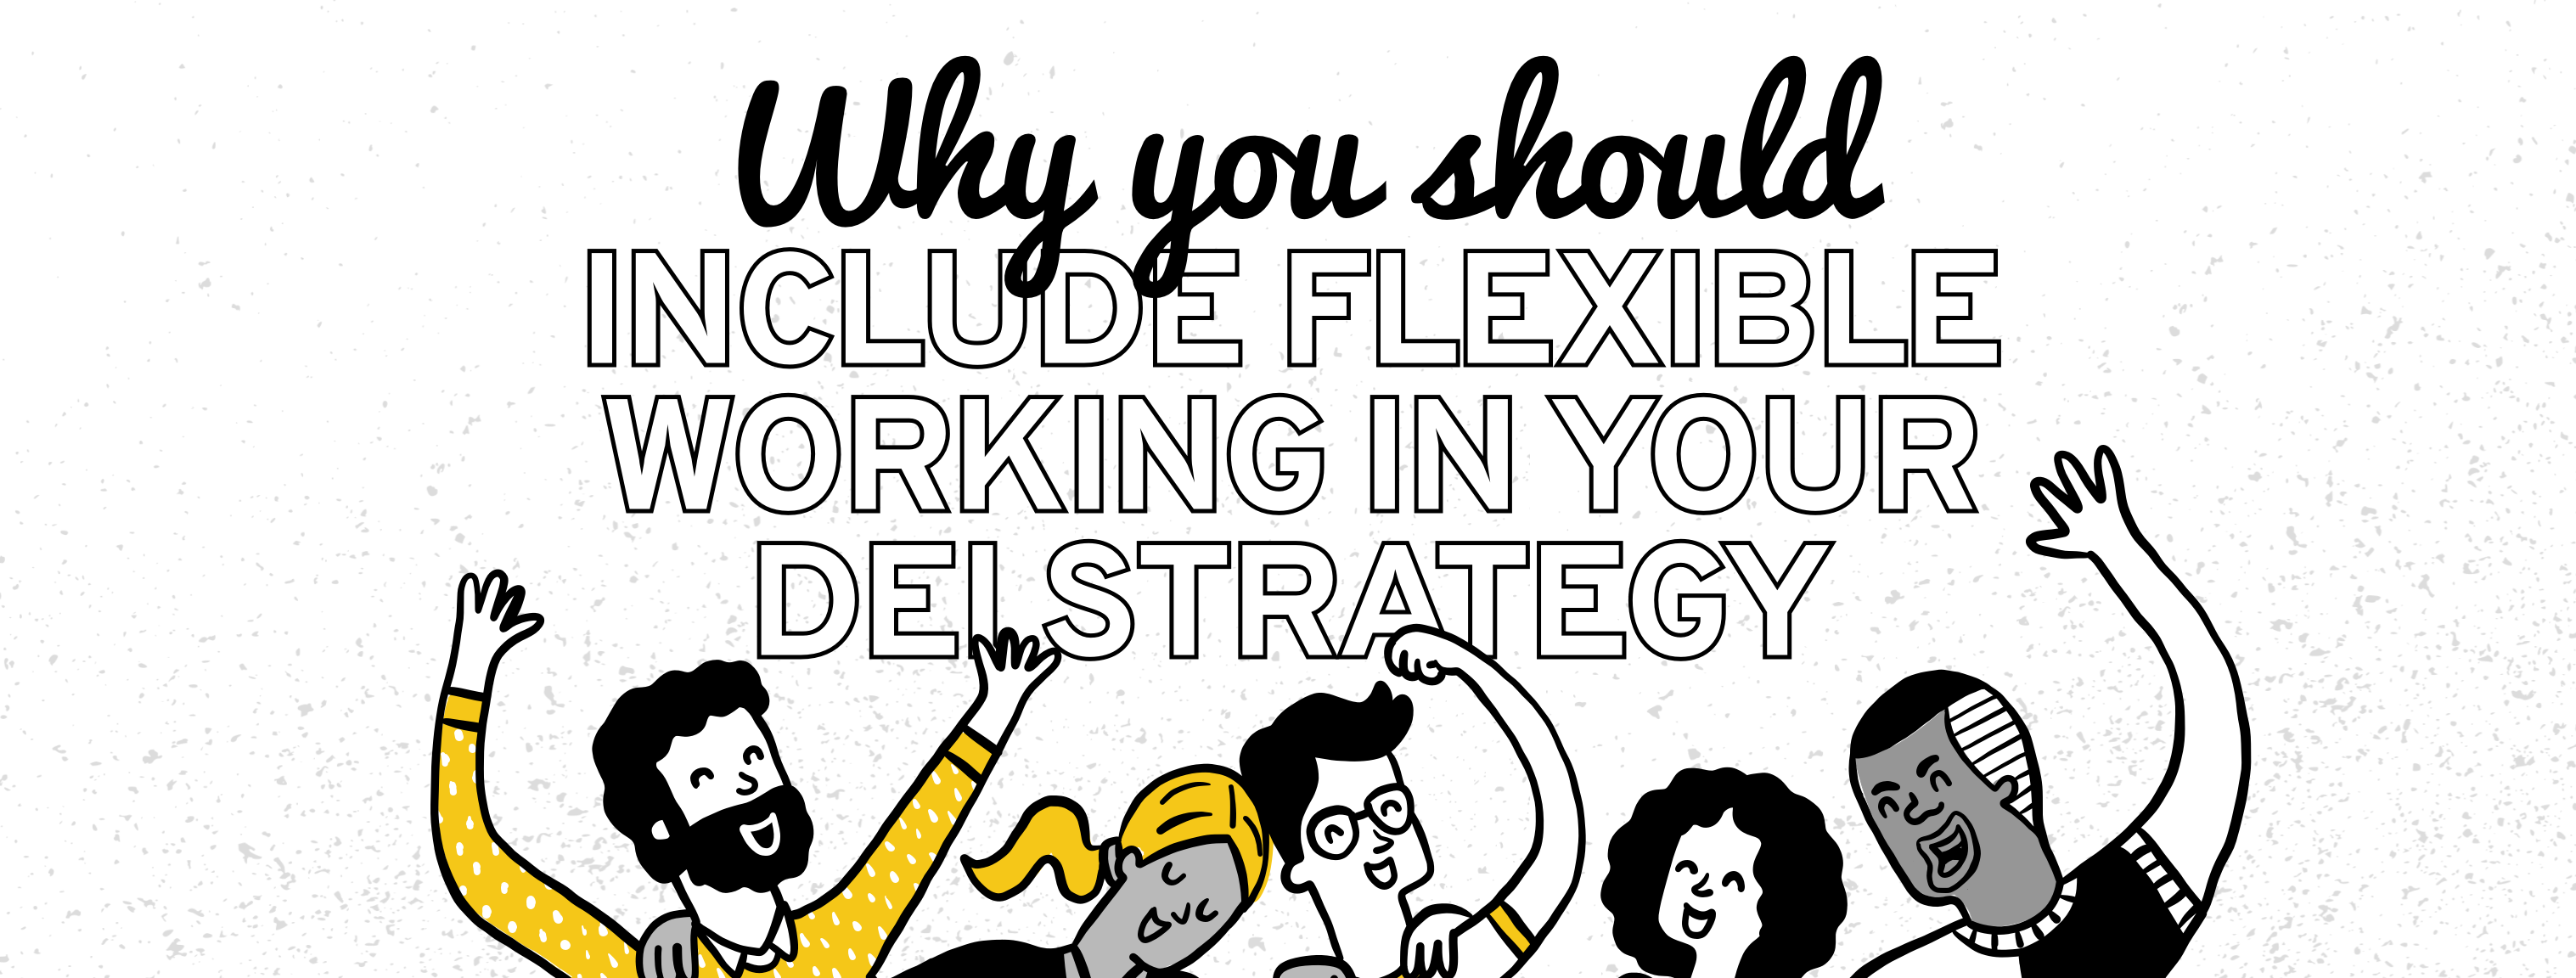 flexible-working-and-dei